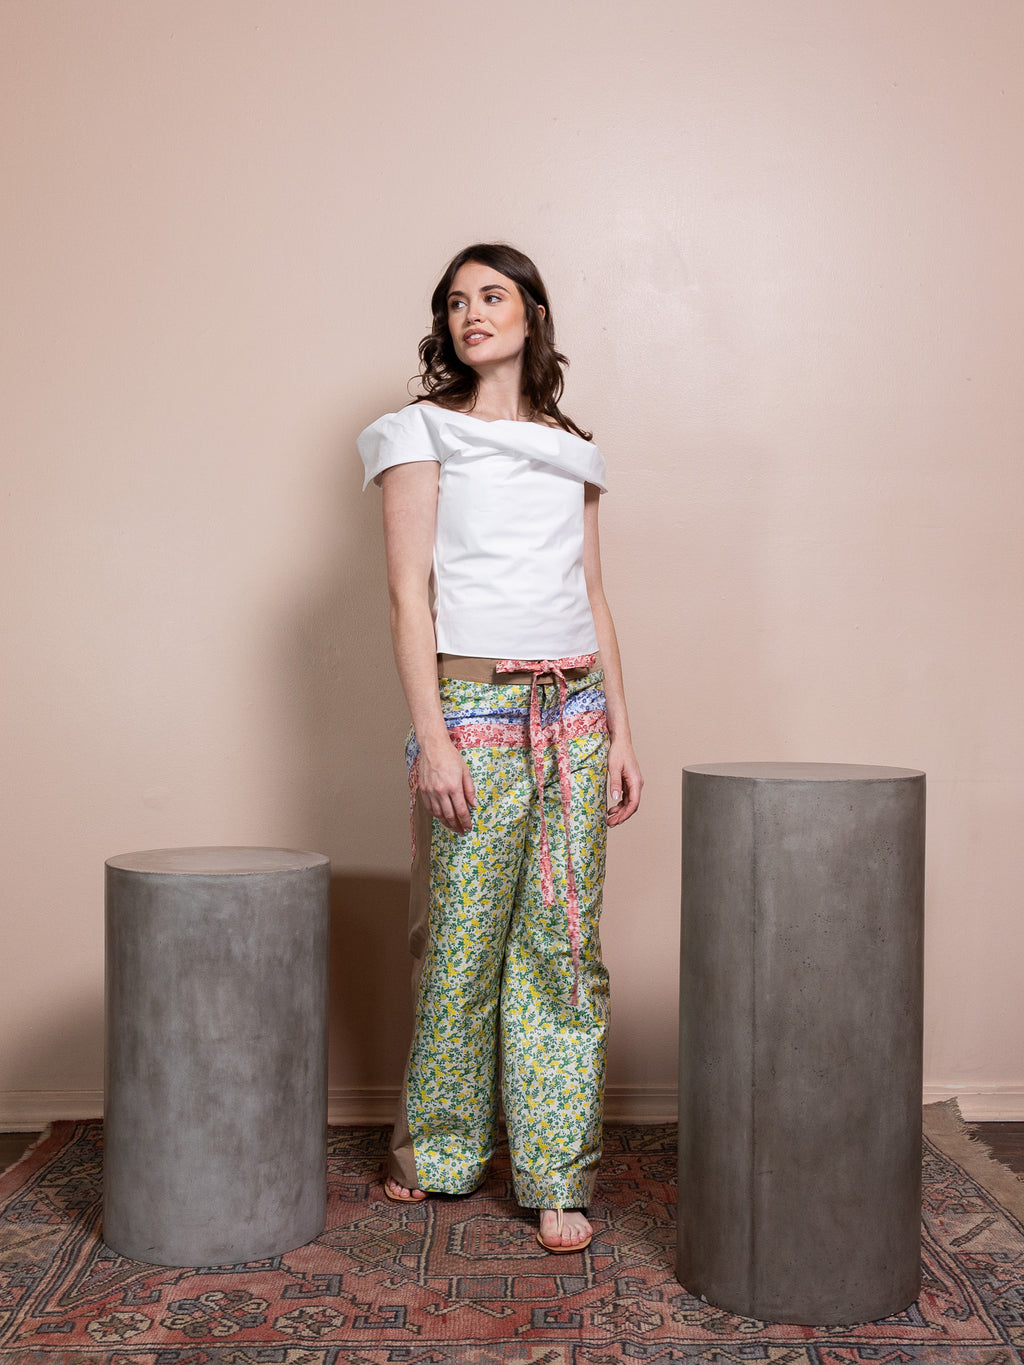 Woman in white top and floral pants against pink background